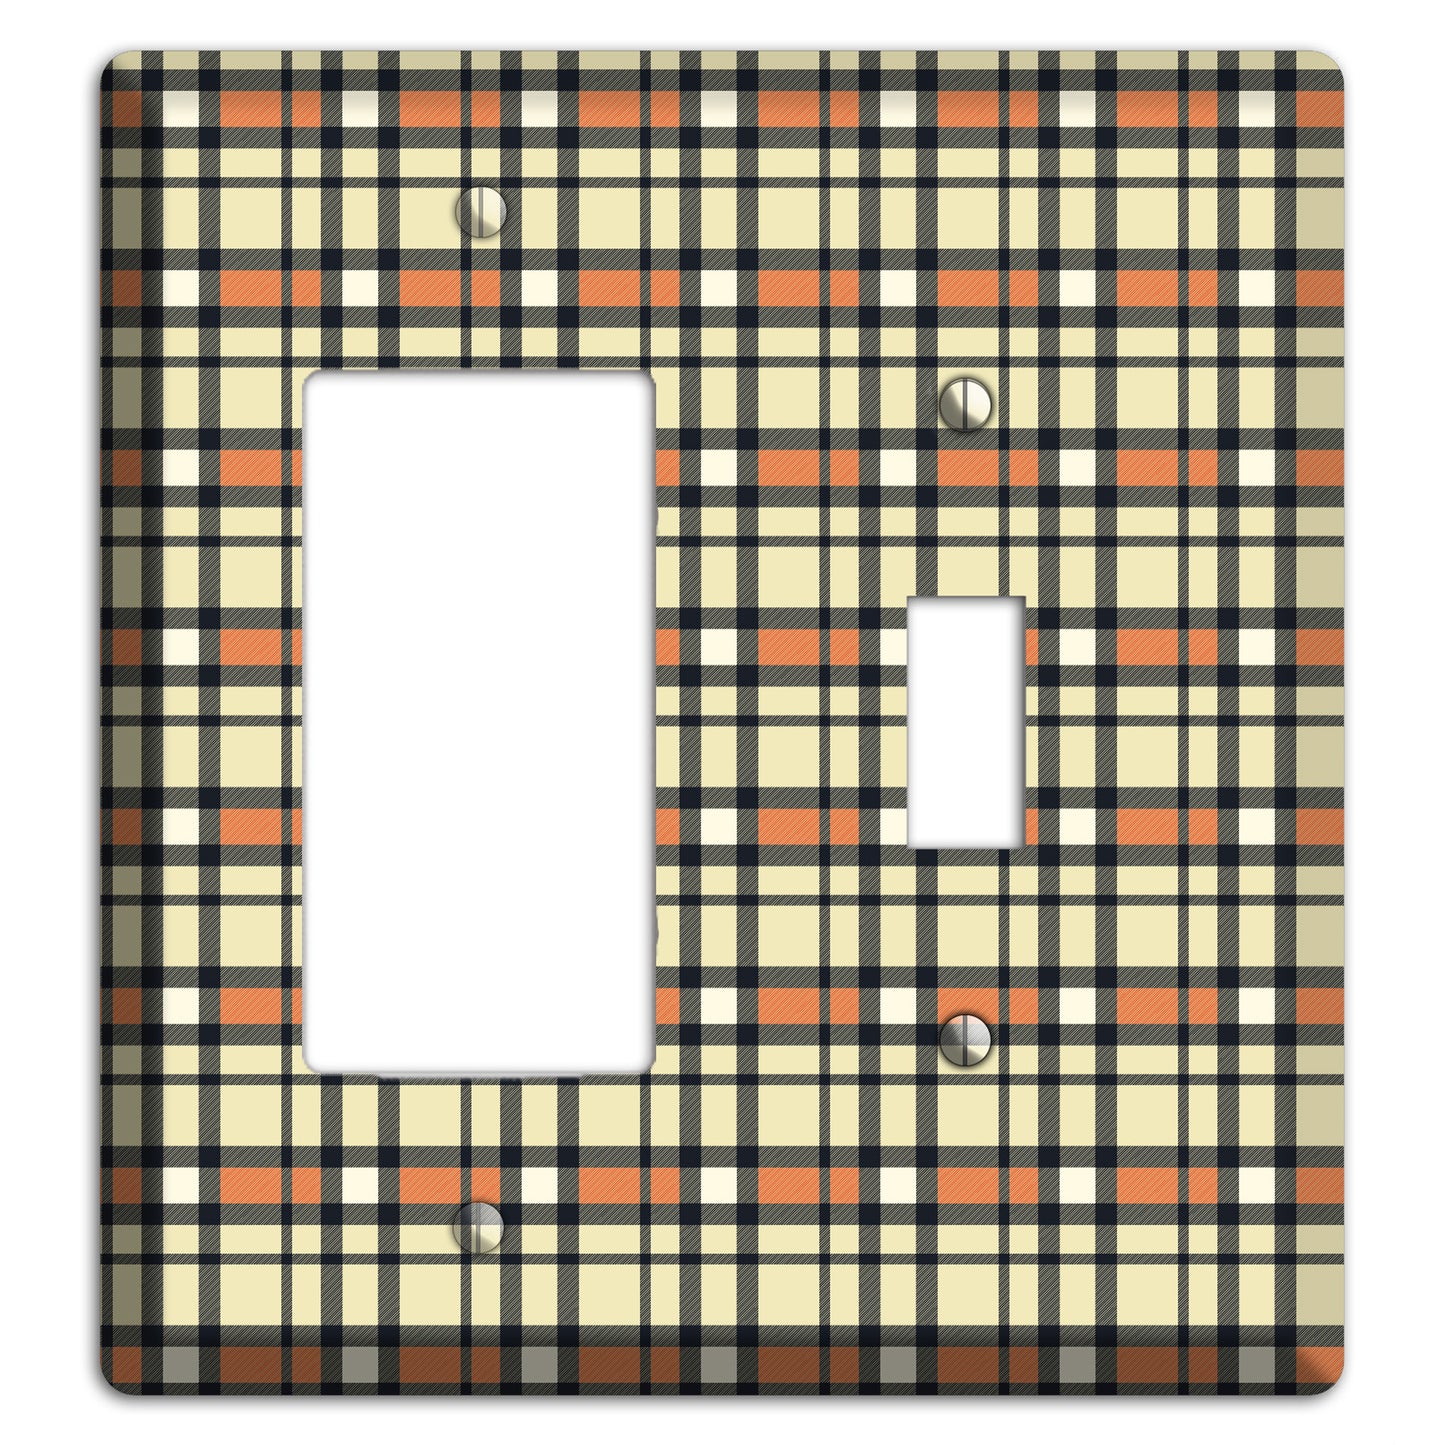 Beige and Brown Plaid Rocker / Toggle Wallplate